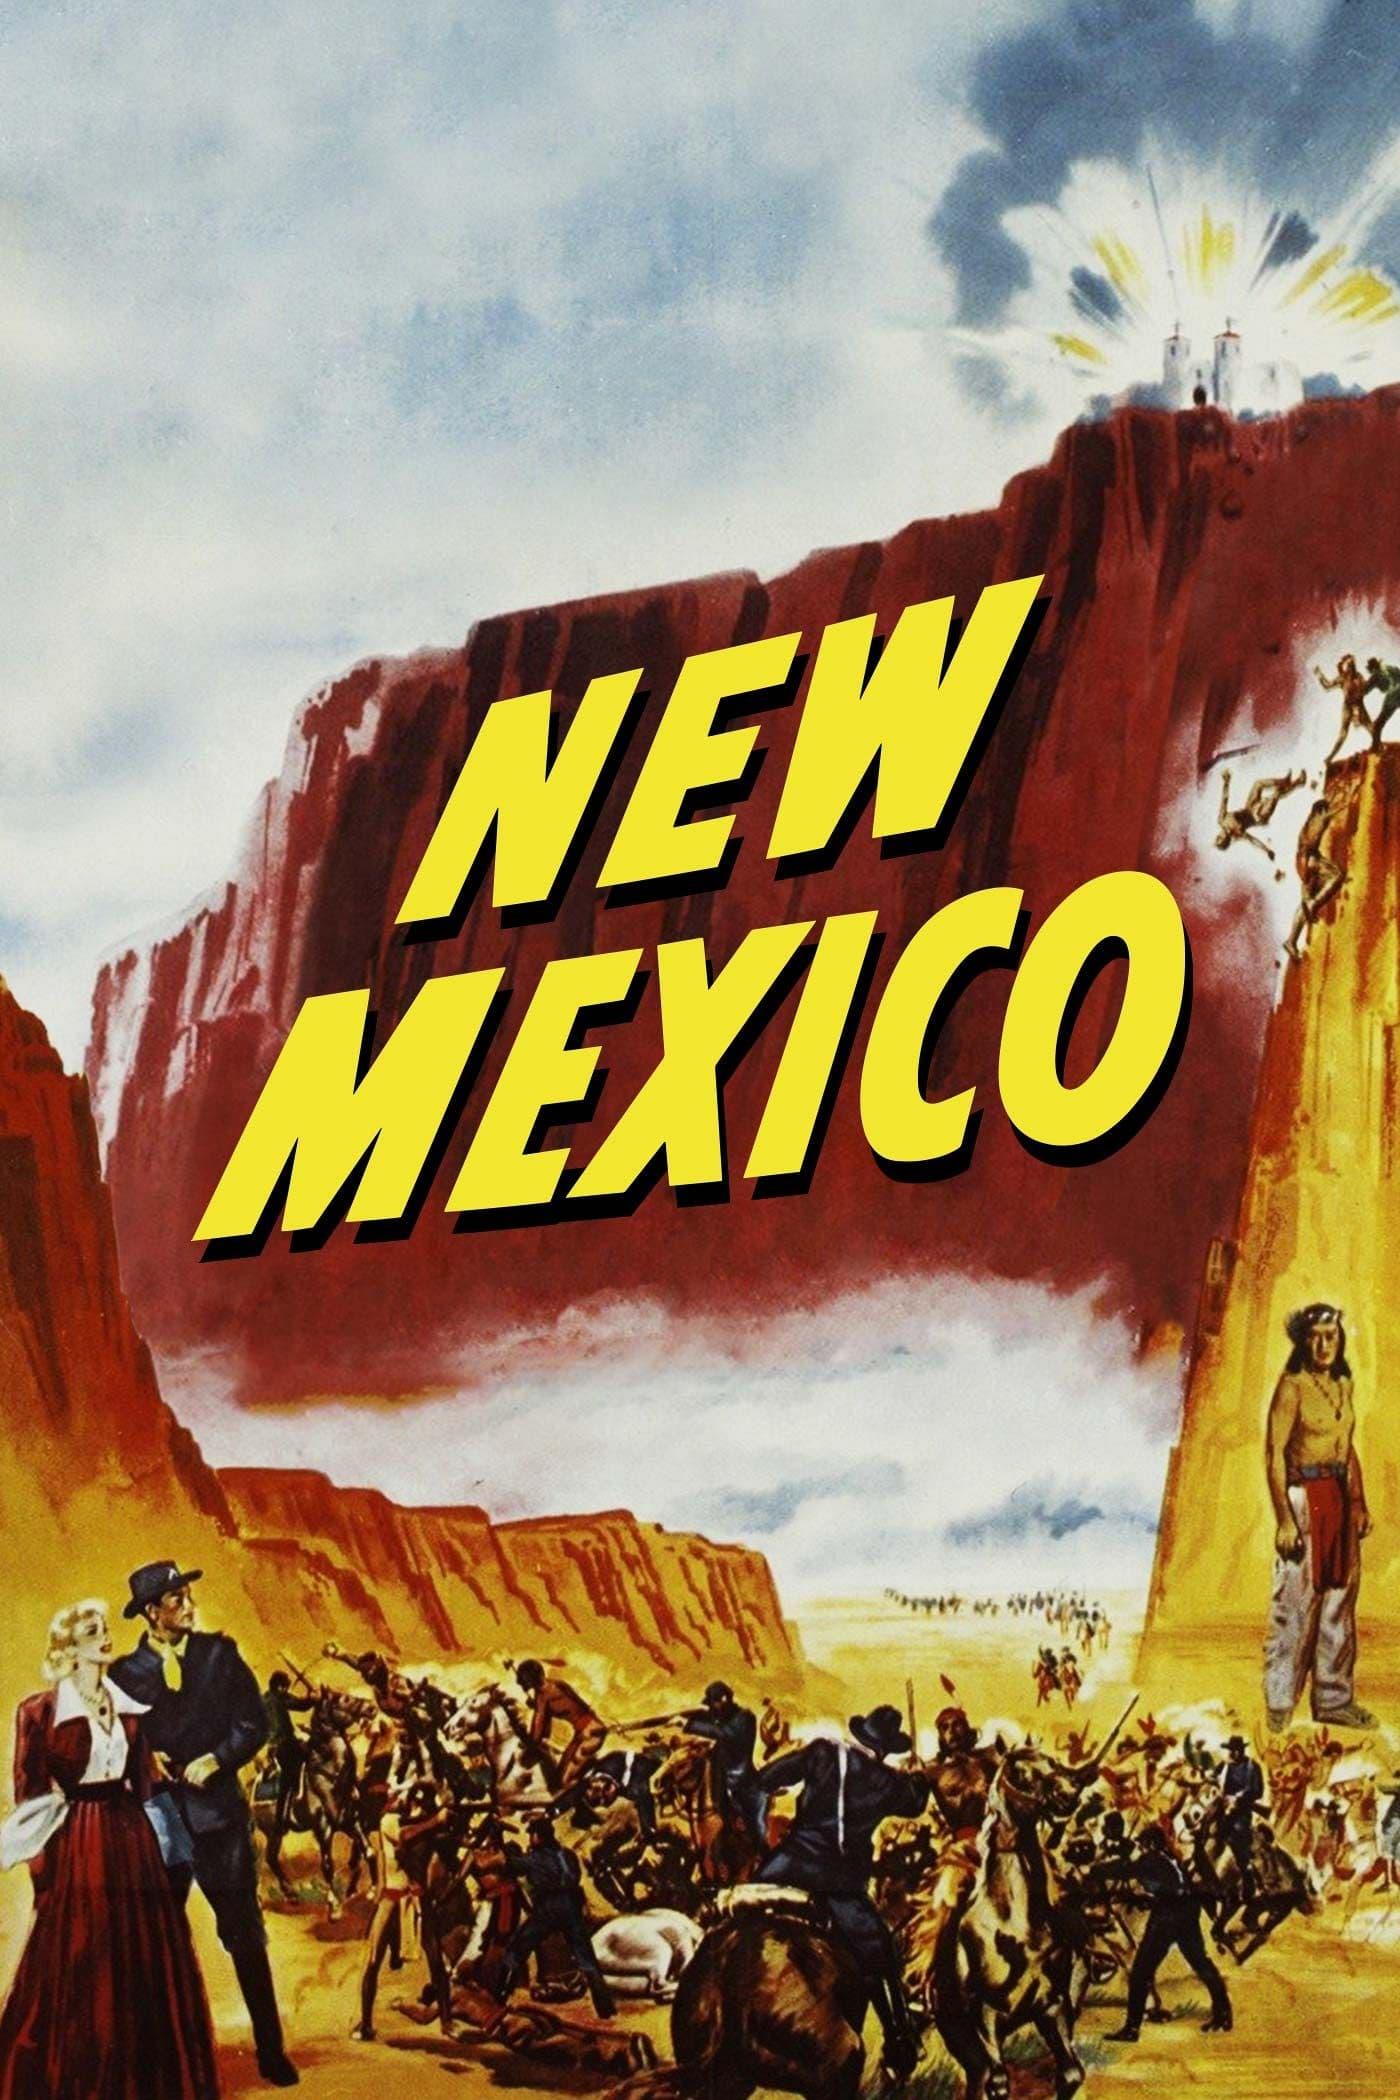 New Mexico poster